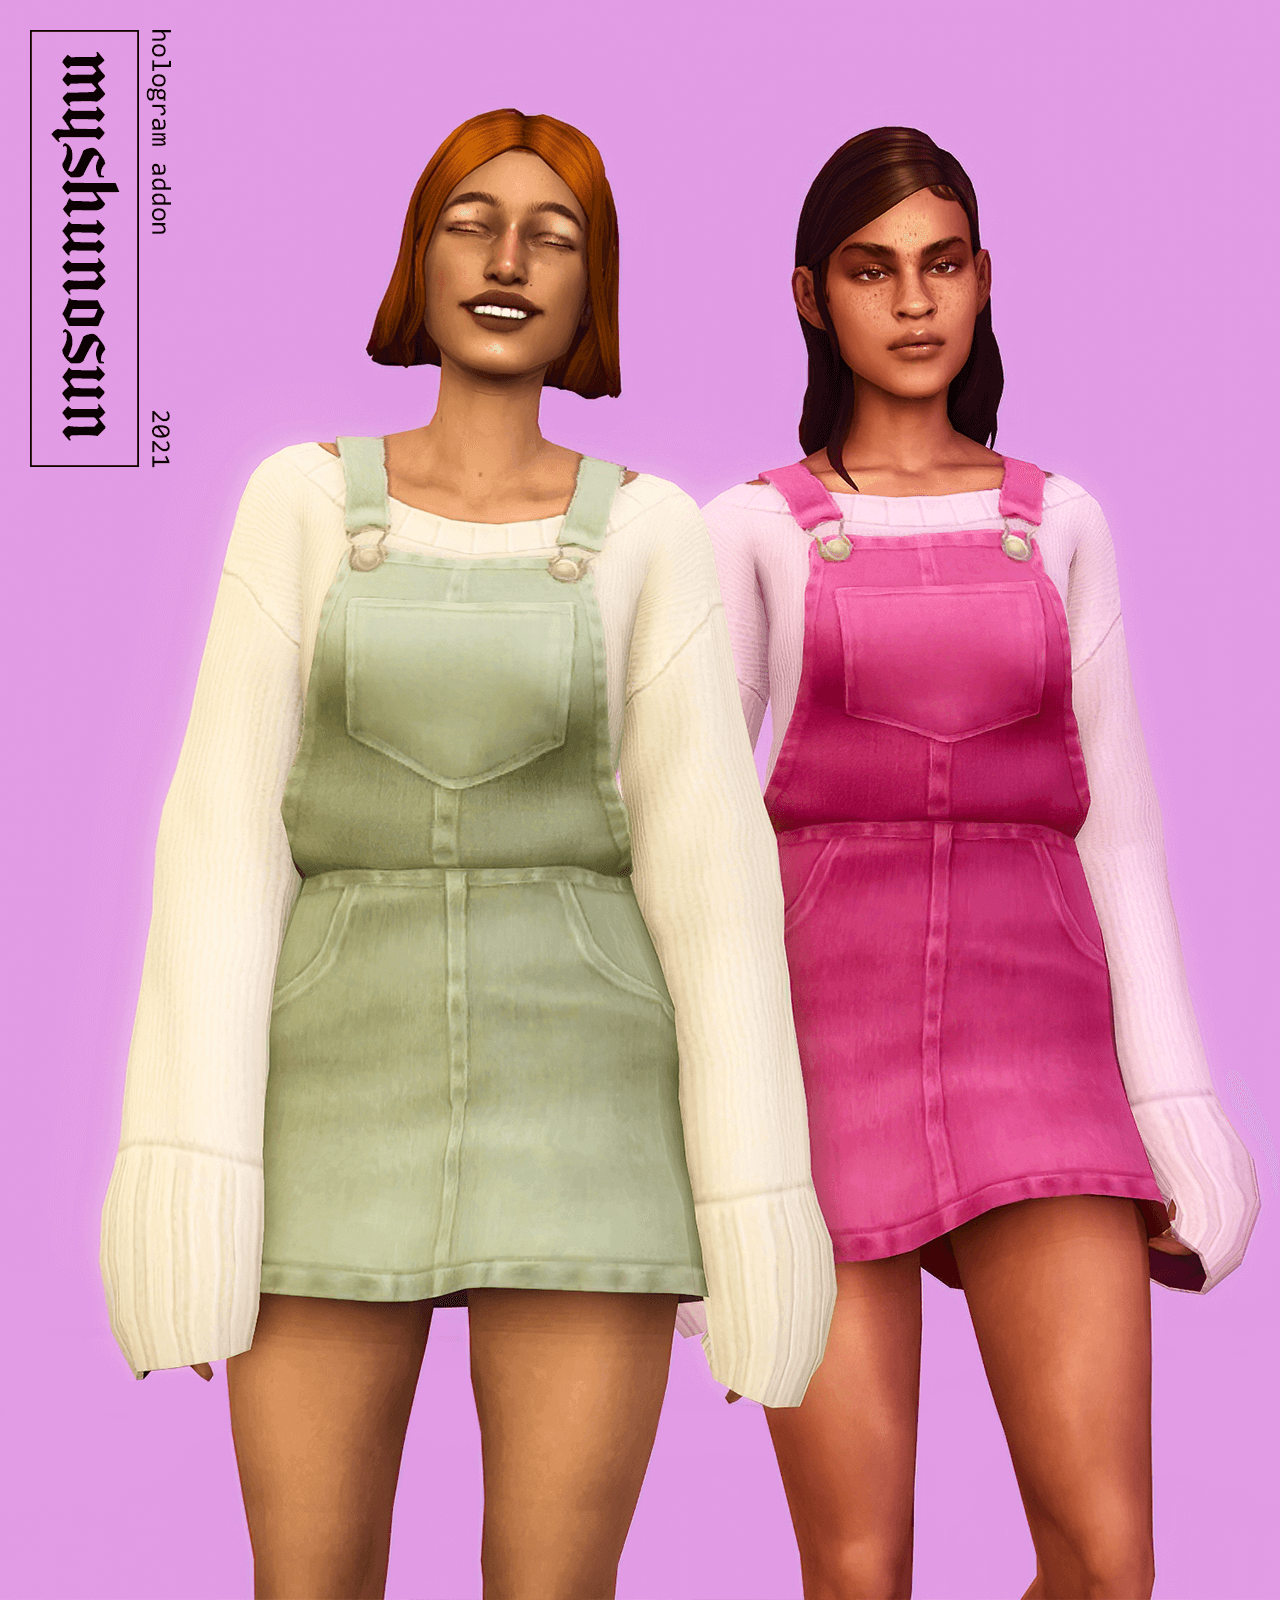 Sims 4 Extreme Body Sliders Mod Klodowntown